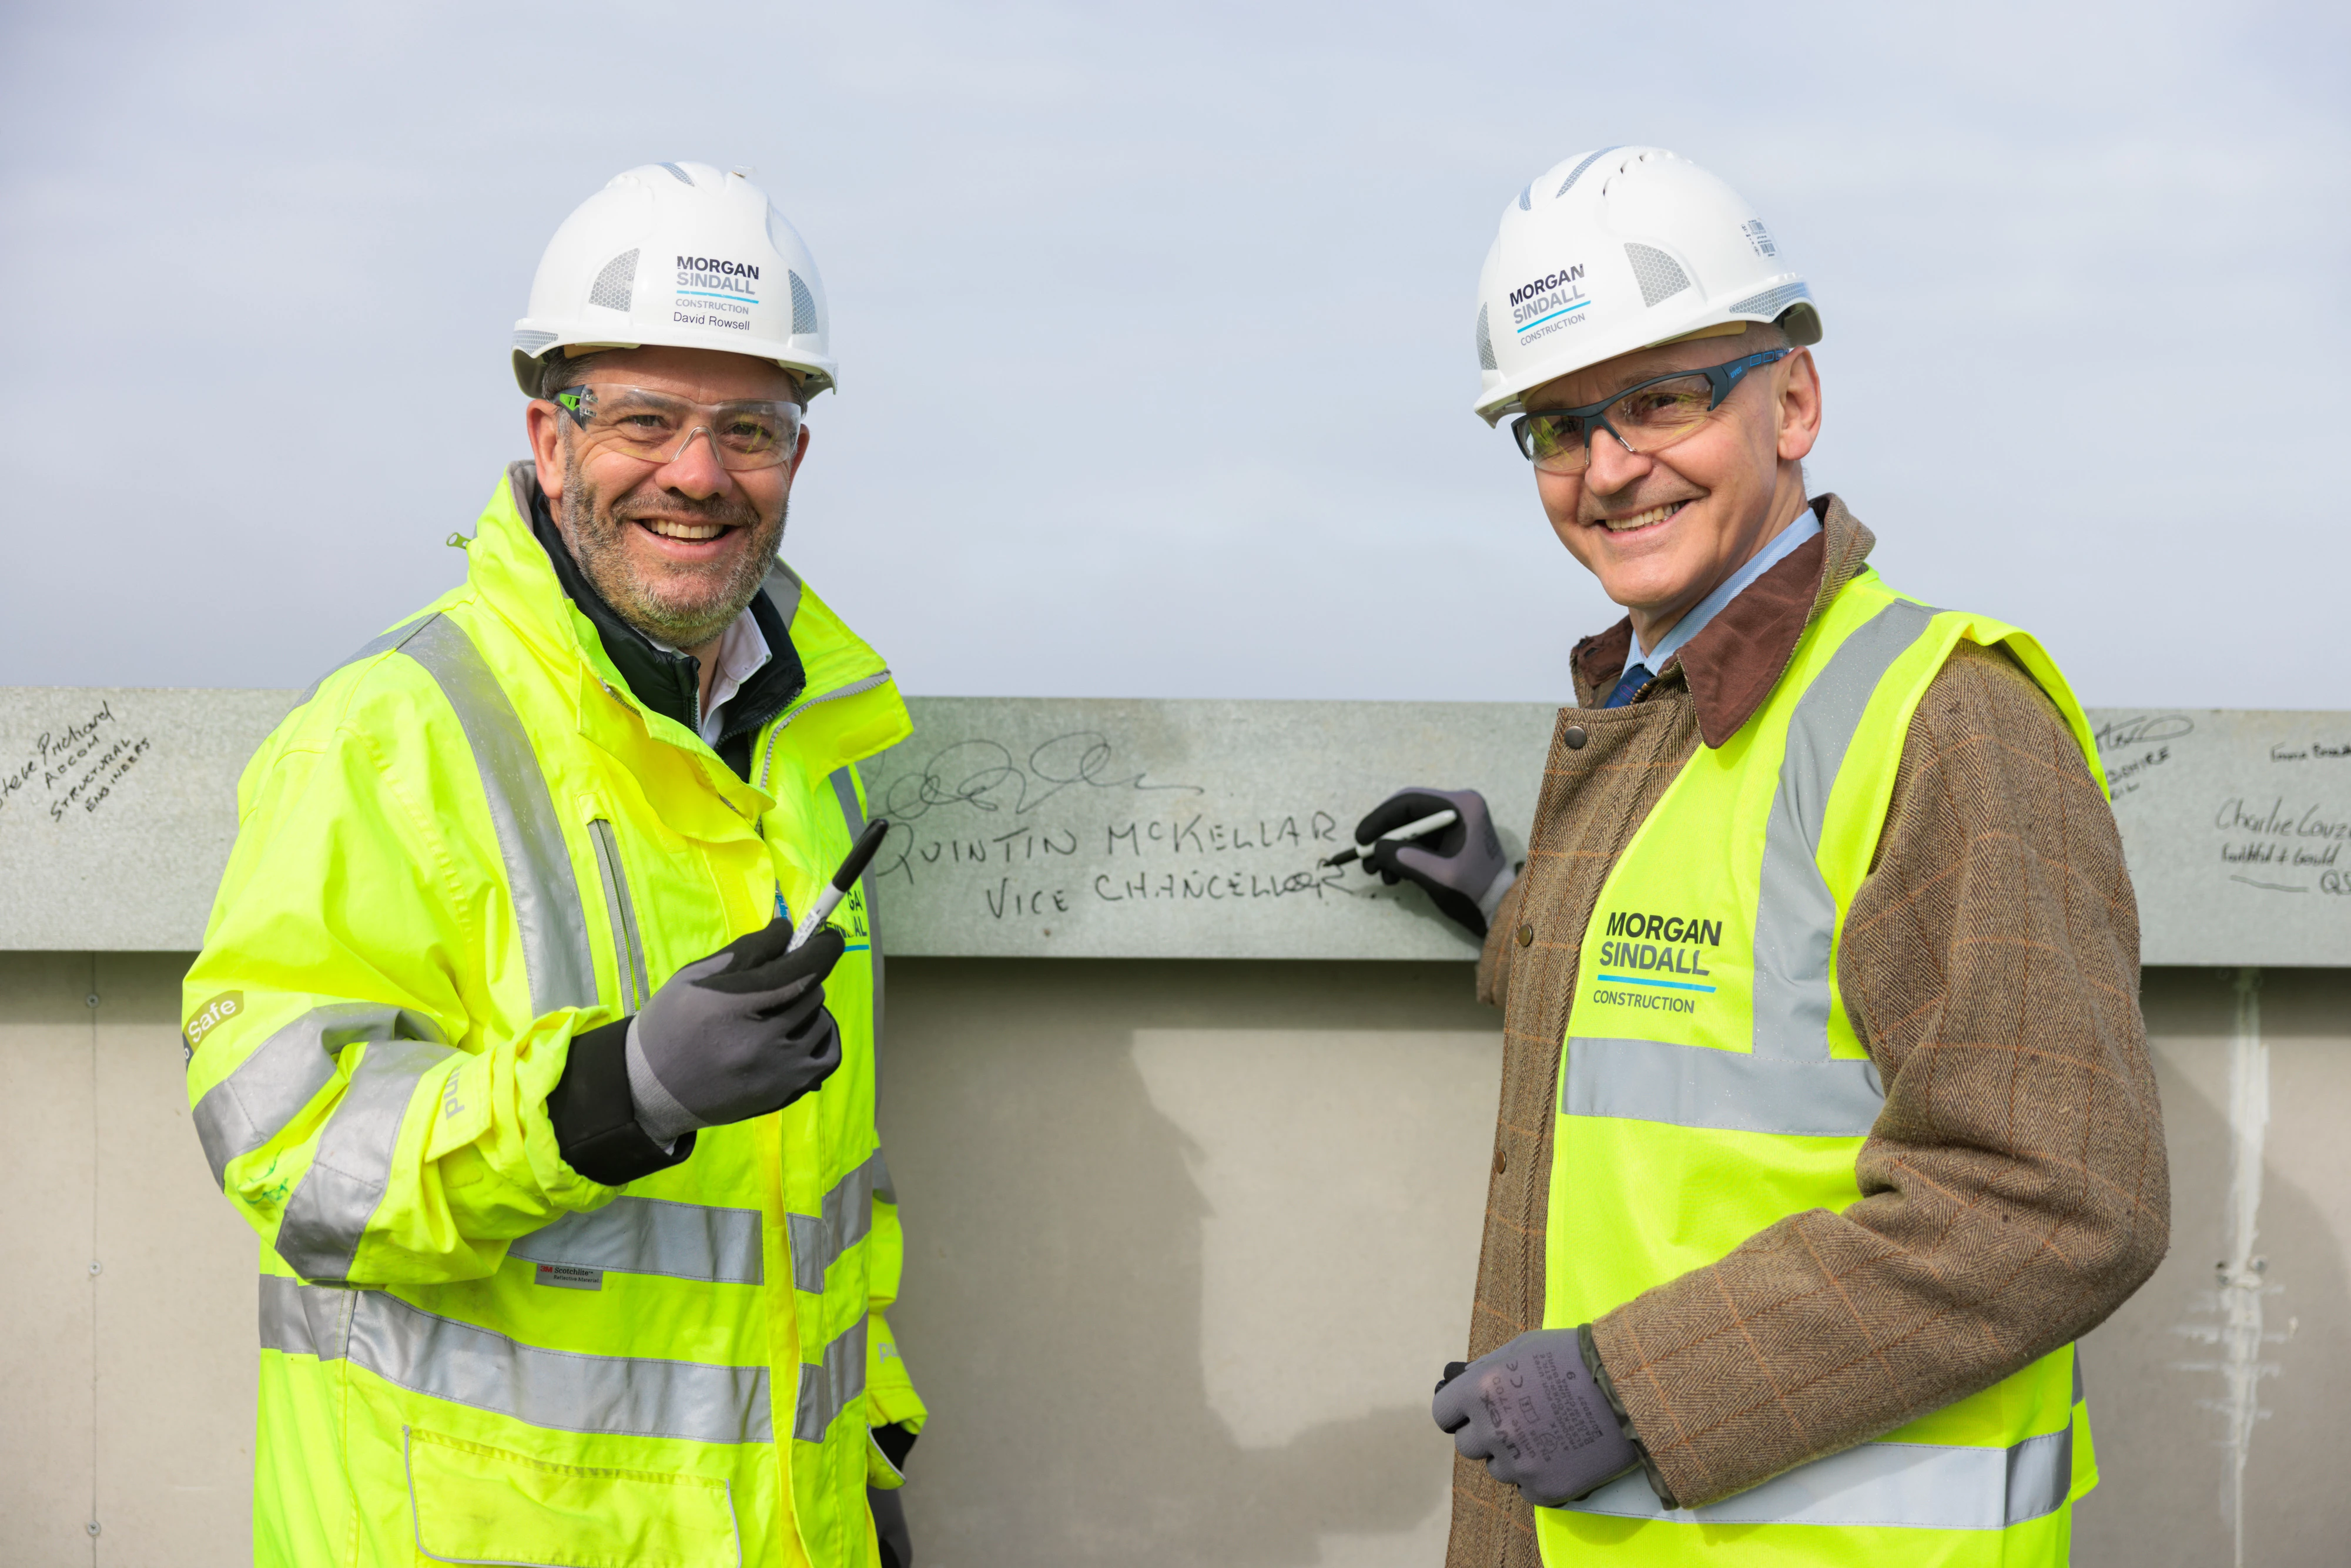 Left to right: David Rowsell, Northern Home Counties Area Director at Morgan Sindall Construction; Professor Quintin McKellar, Vice-Chancellor and Chief Executive of the University of Hertfordshire